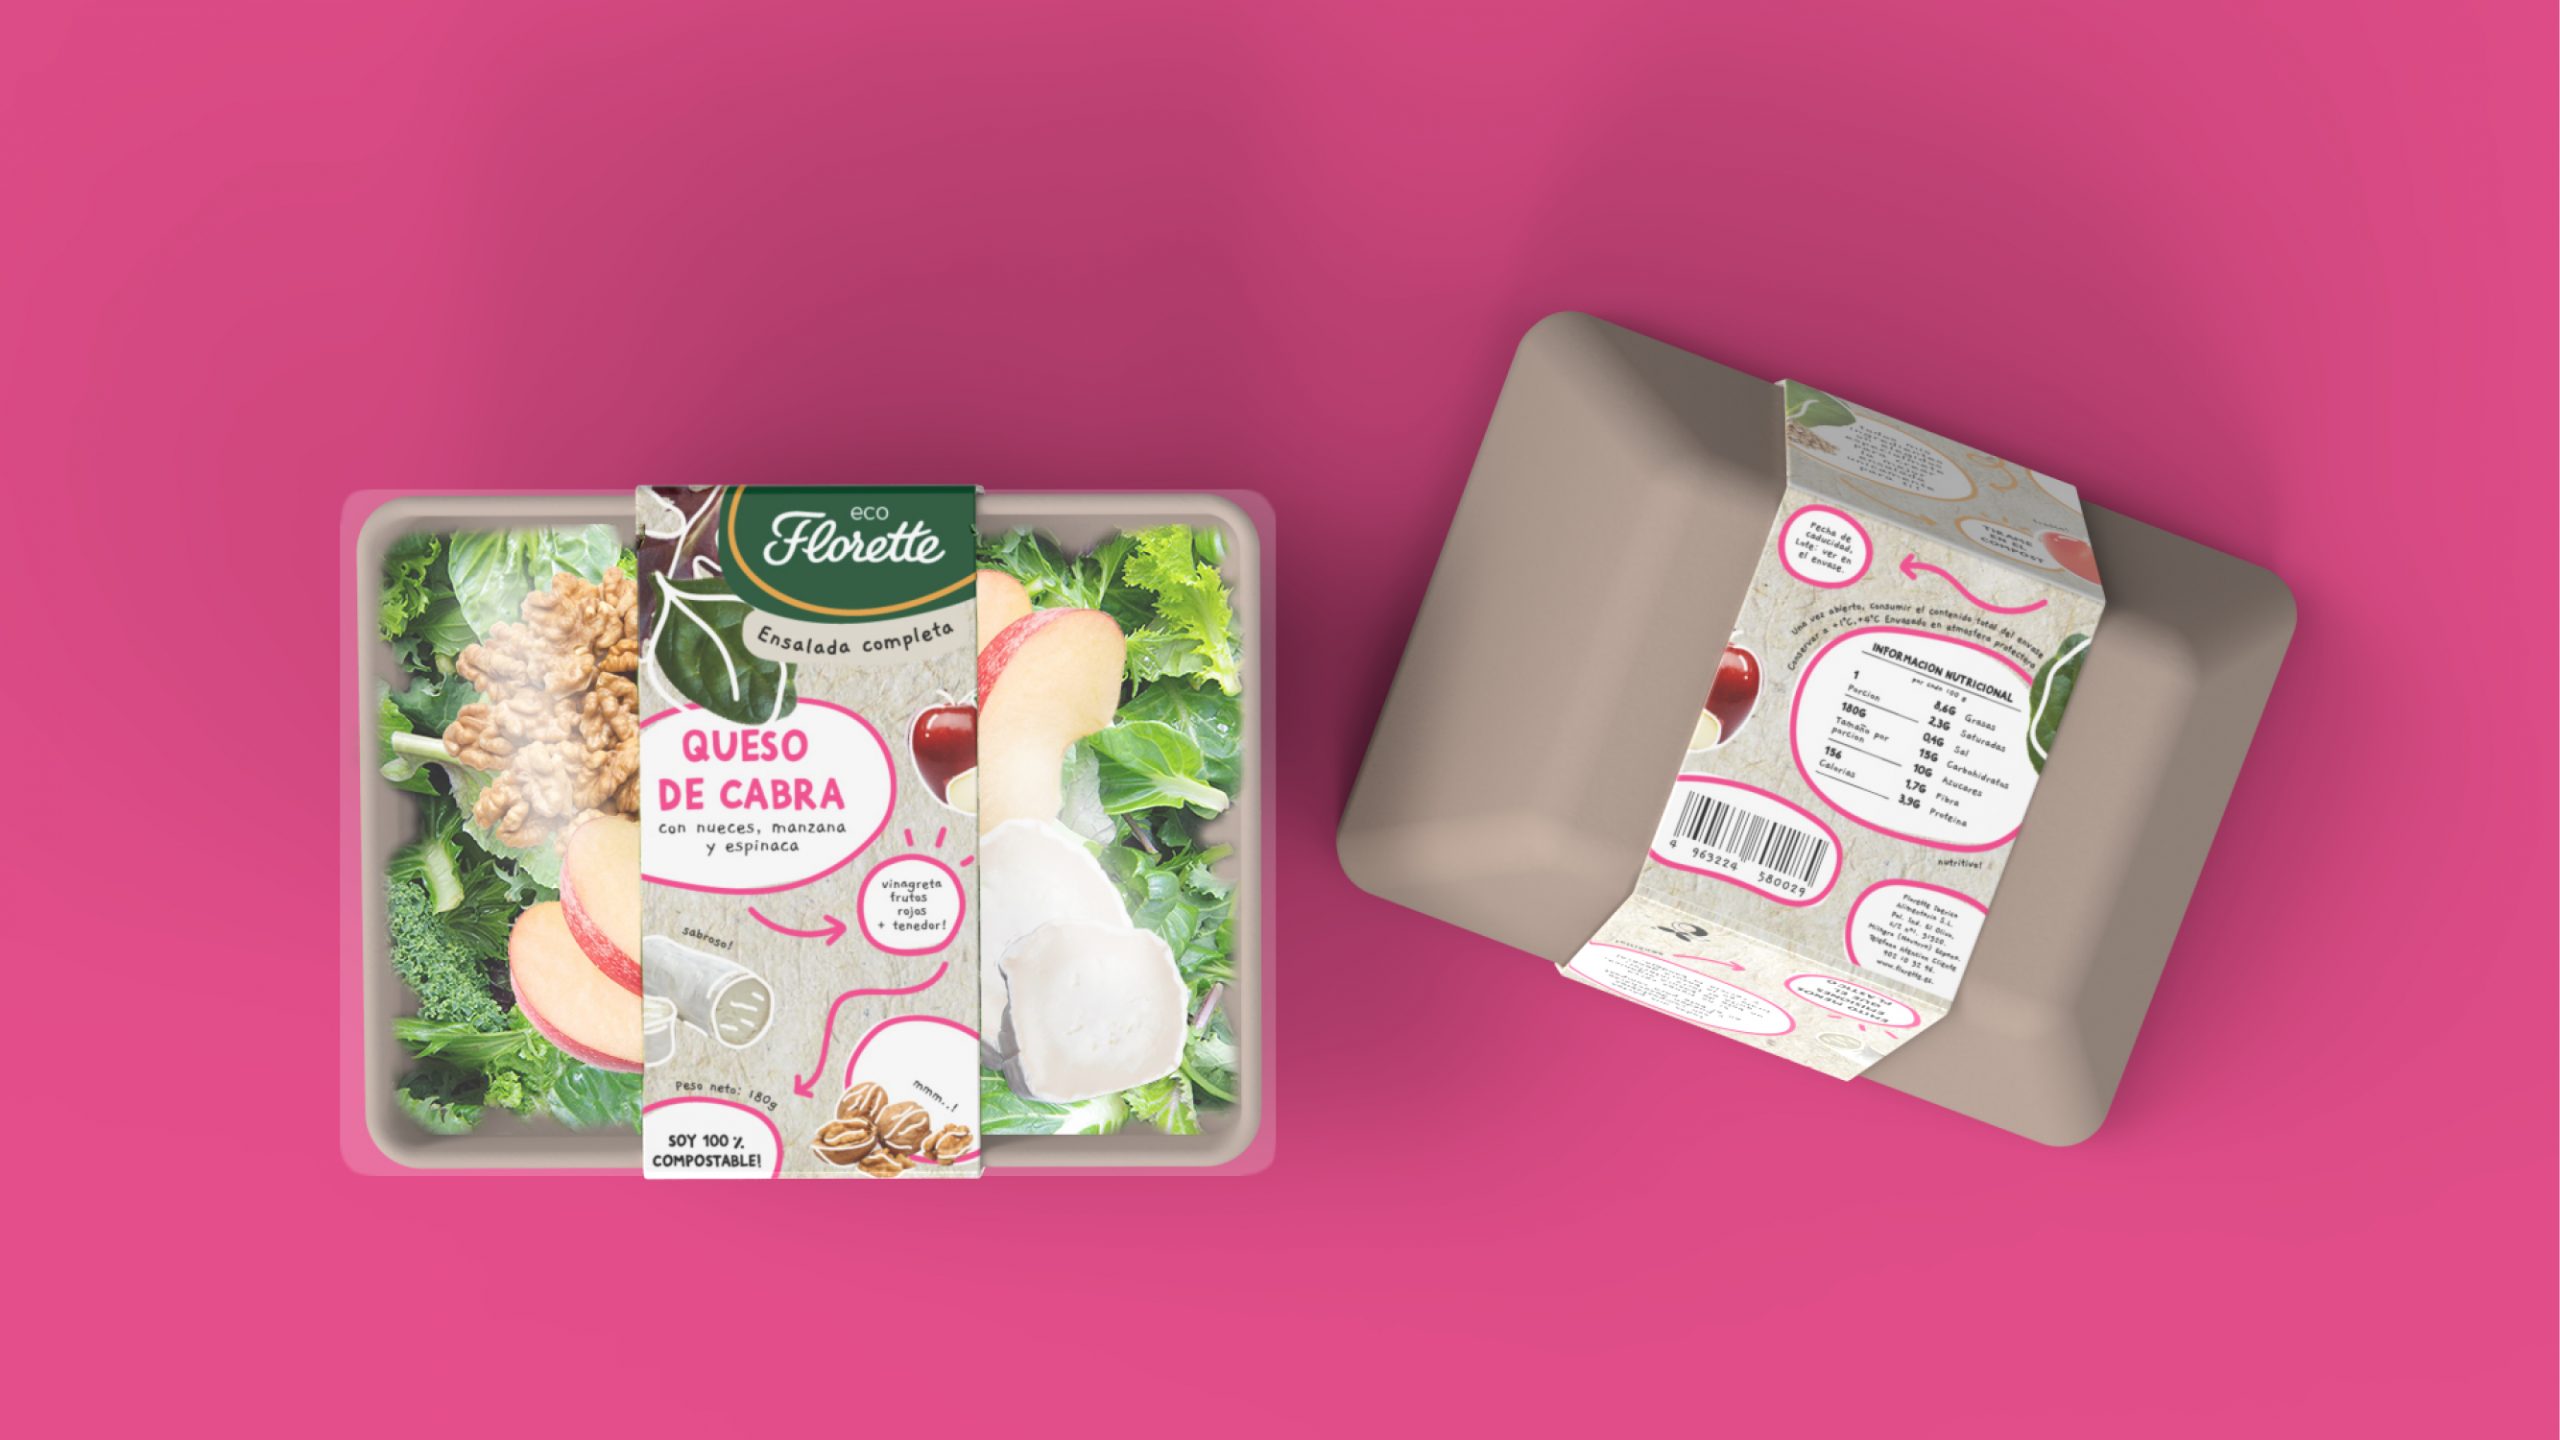 Pink background with new packaging design for the ready-eat-salad of goat cheese for Florette, top view of the pack